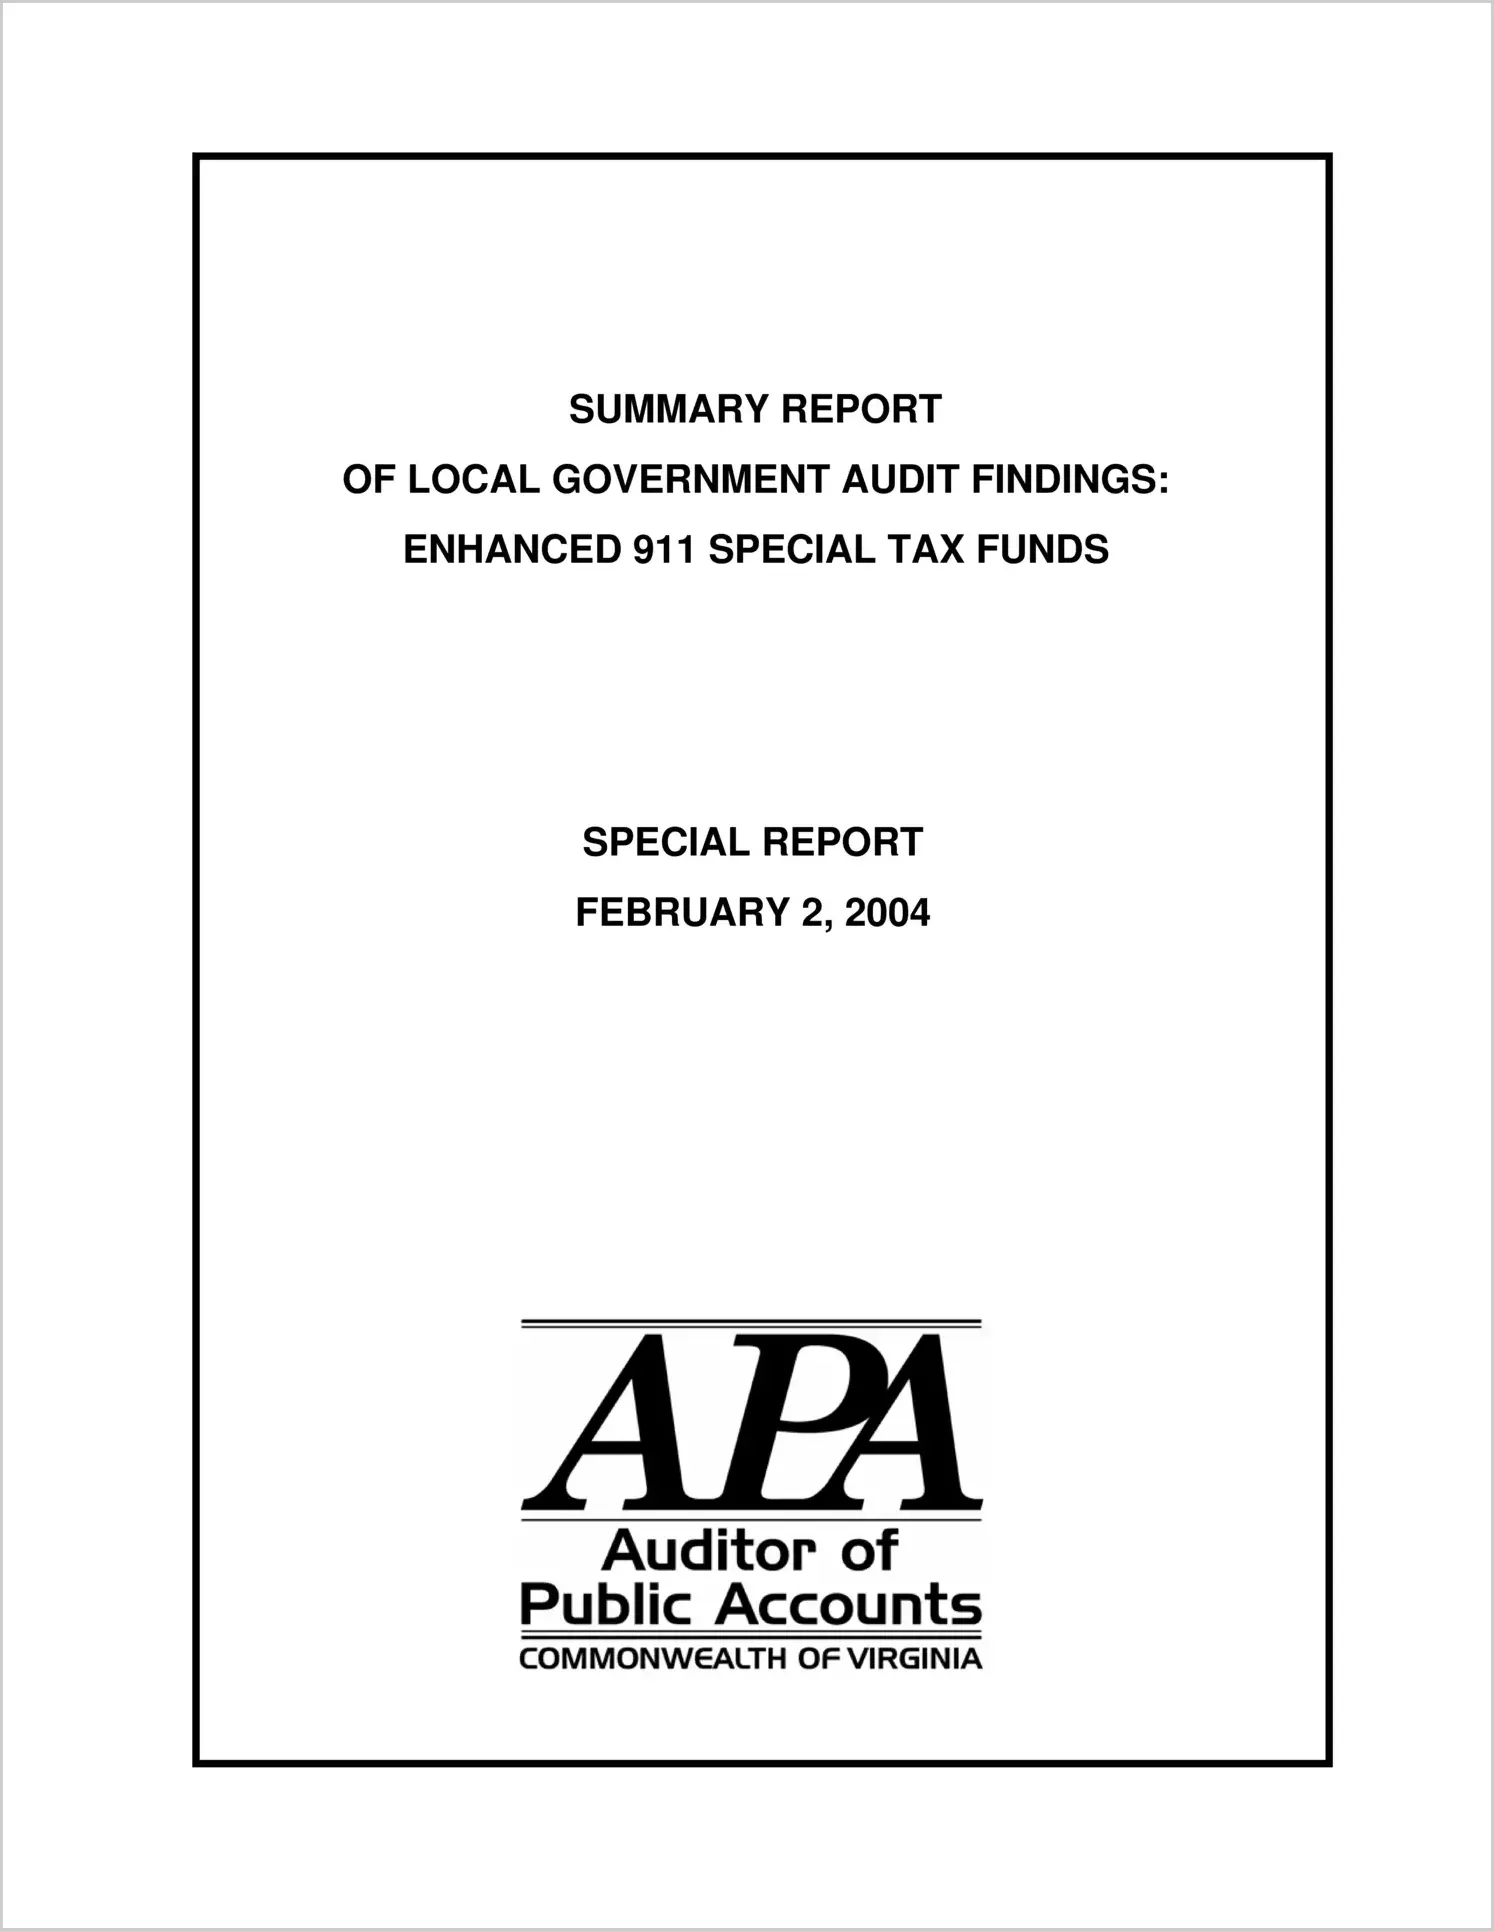 Special ReportSummary Report of Local Government Audit Findings Enhanced 911 Special Tax Funds(Report Date: February 2, 2004)